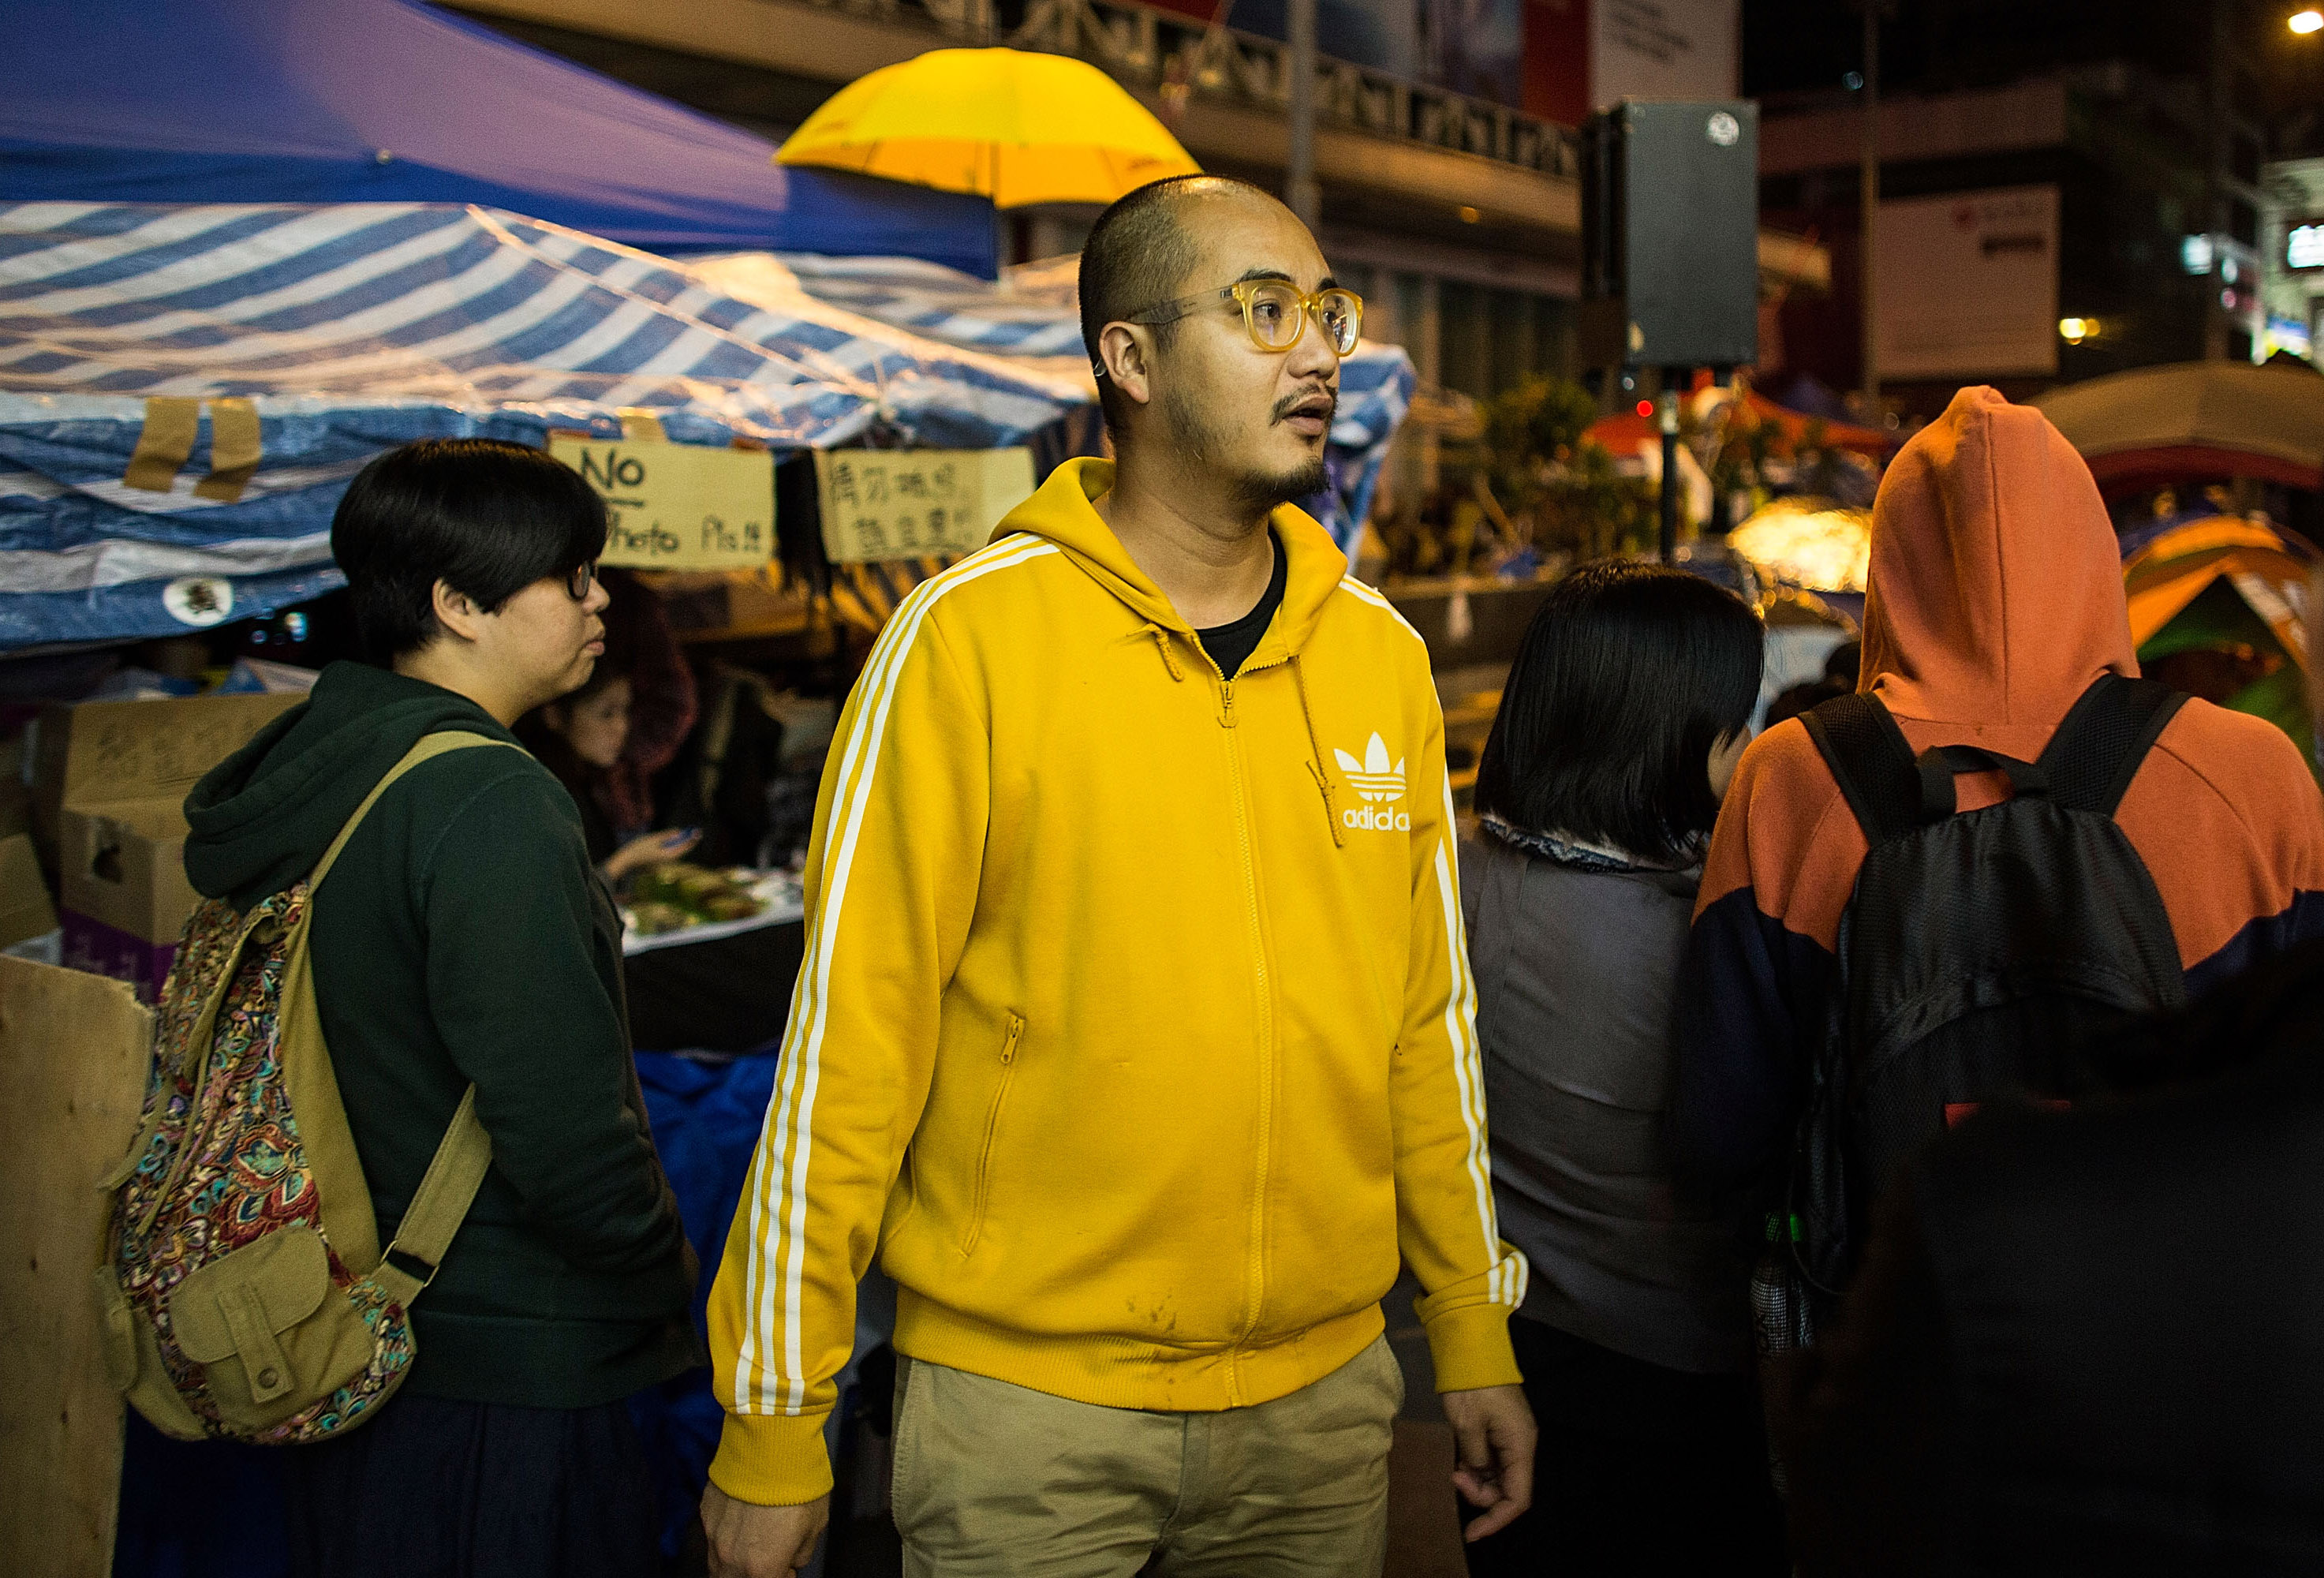 Activist Wong Yeung-tat attends a protest at the Occupy Mongkok Occupy site on Nov. 21, 2014, in Hong Kong. He was arrested on Dec. 11 on multiple charges of unlawful assembly (Lam Yik Fei—Getty Images)